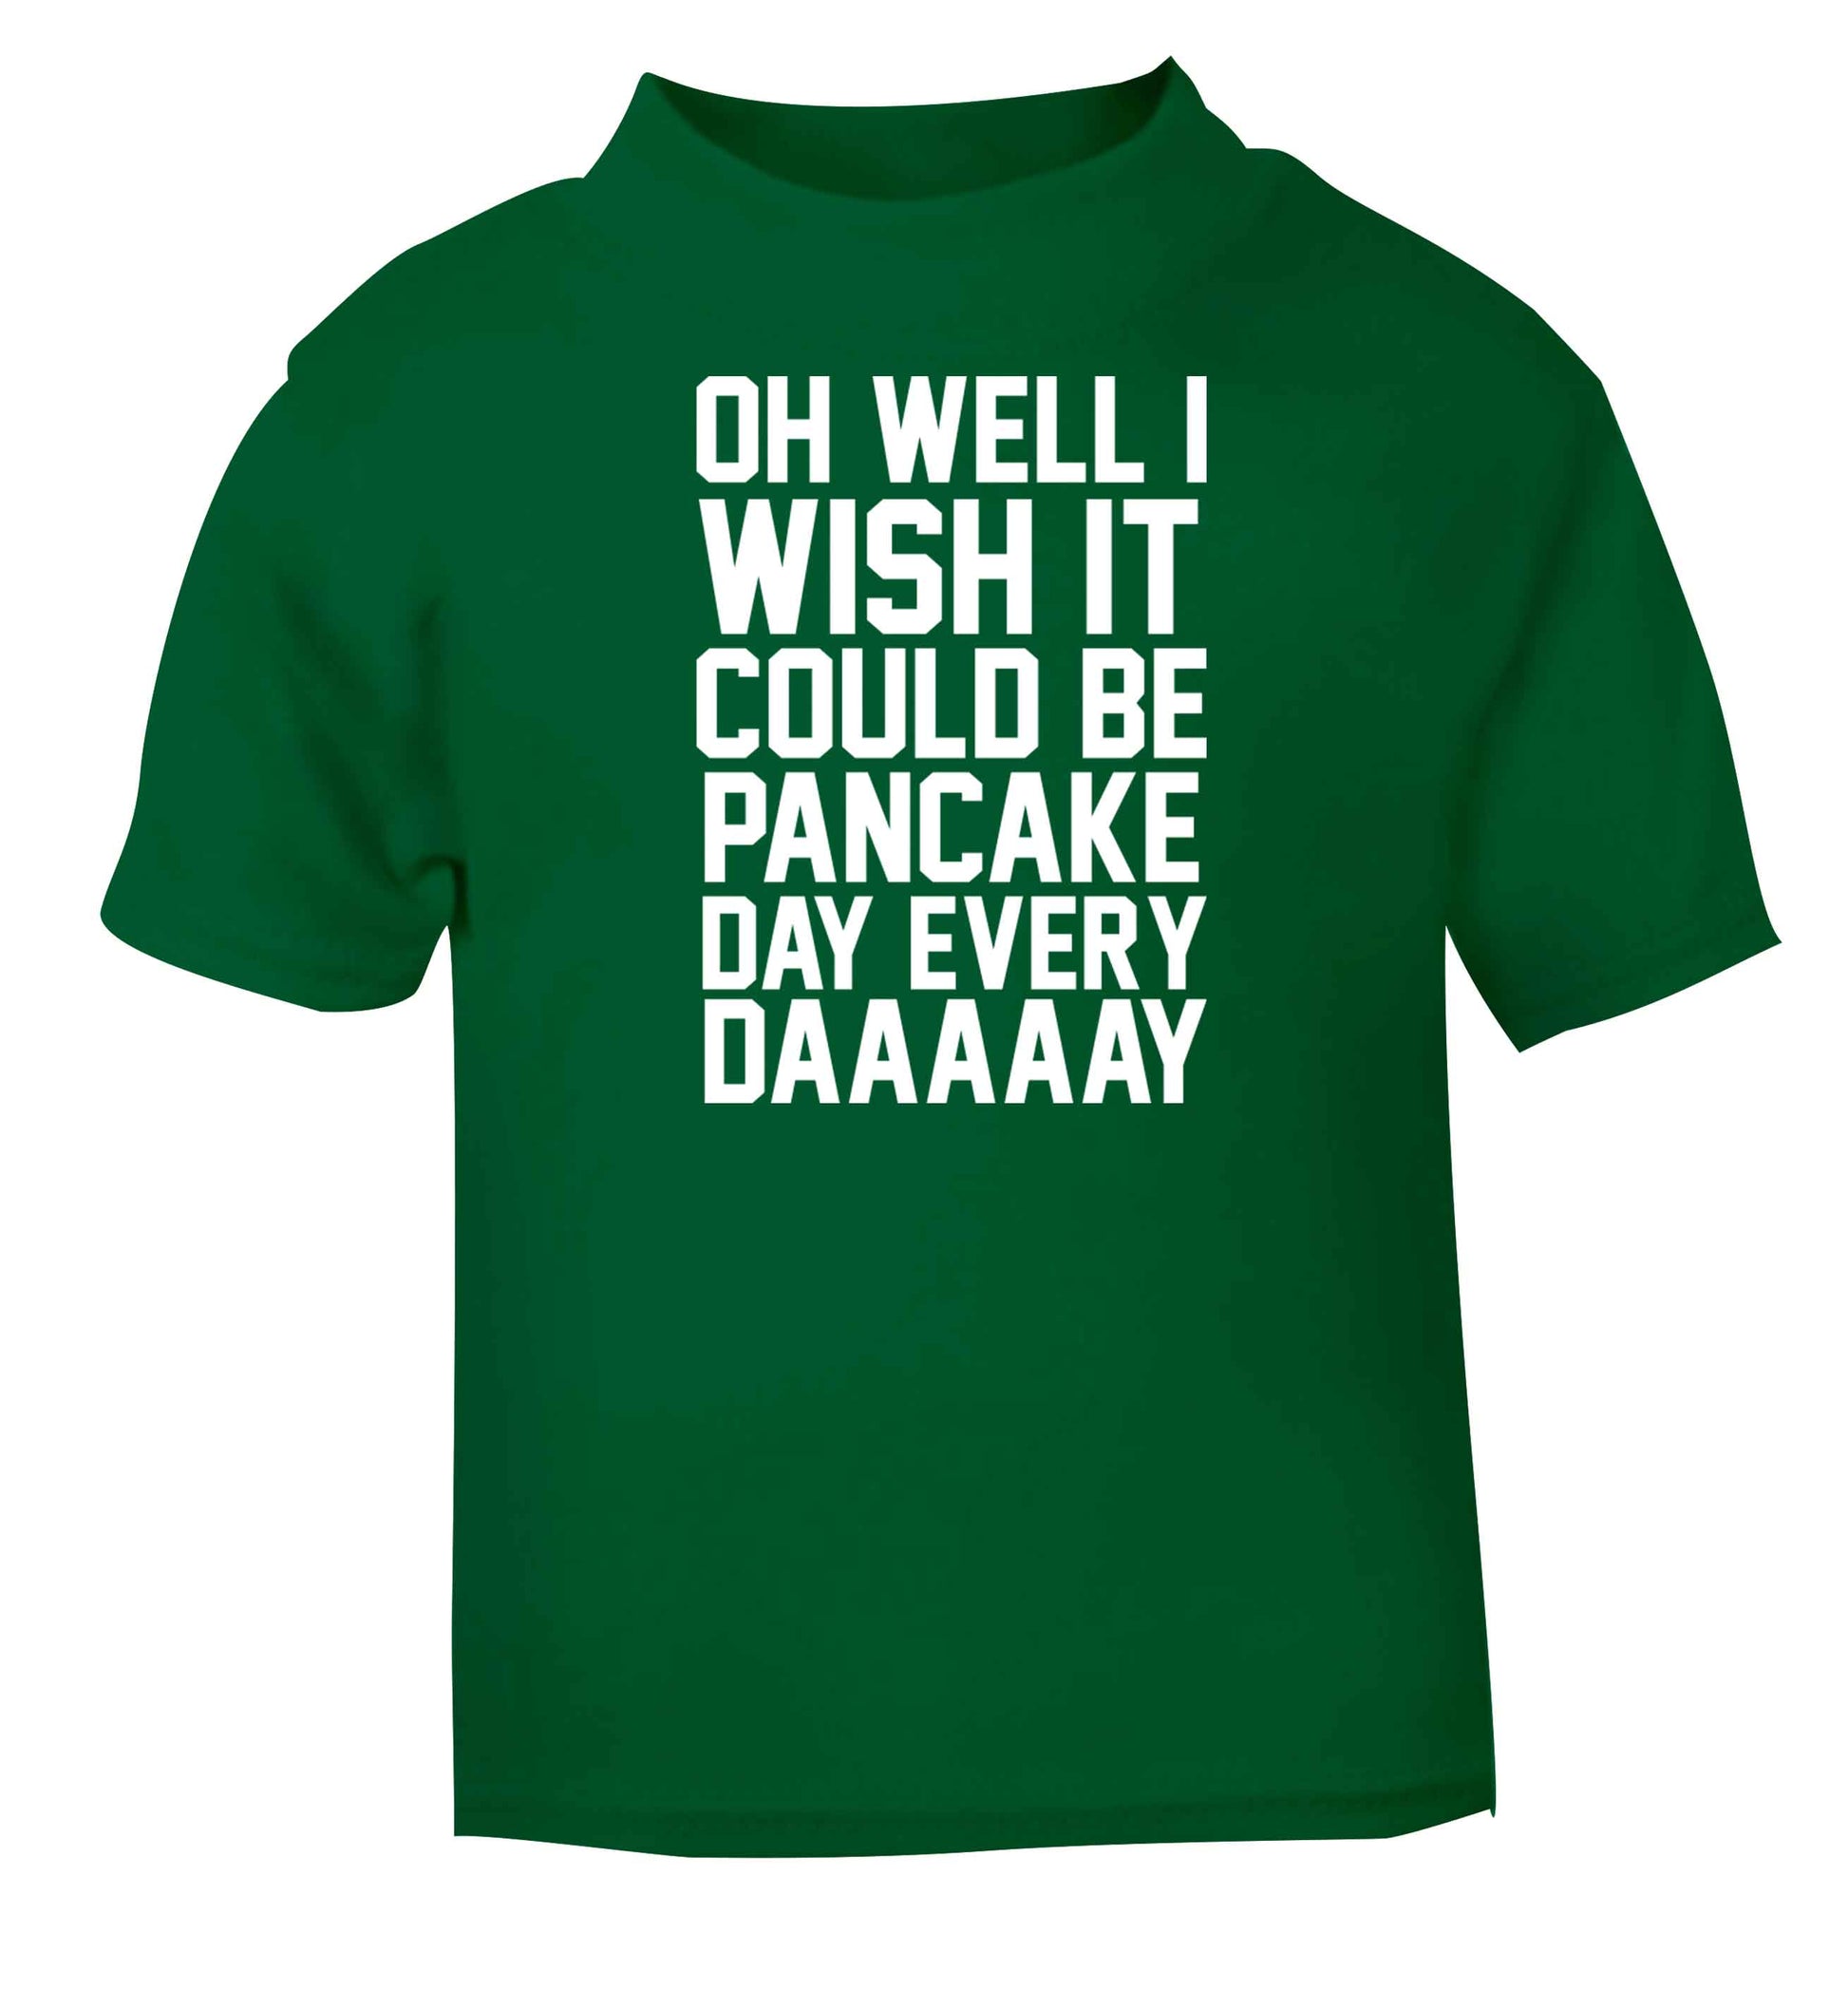 Oh well I wish it could be pancake day every day green baby toddler Tshirt 2 Years